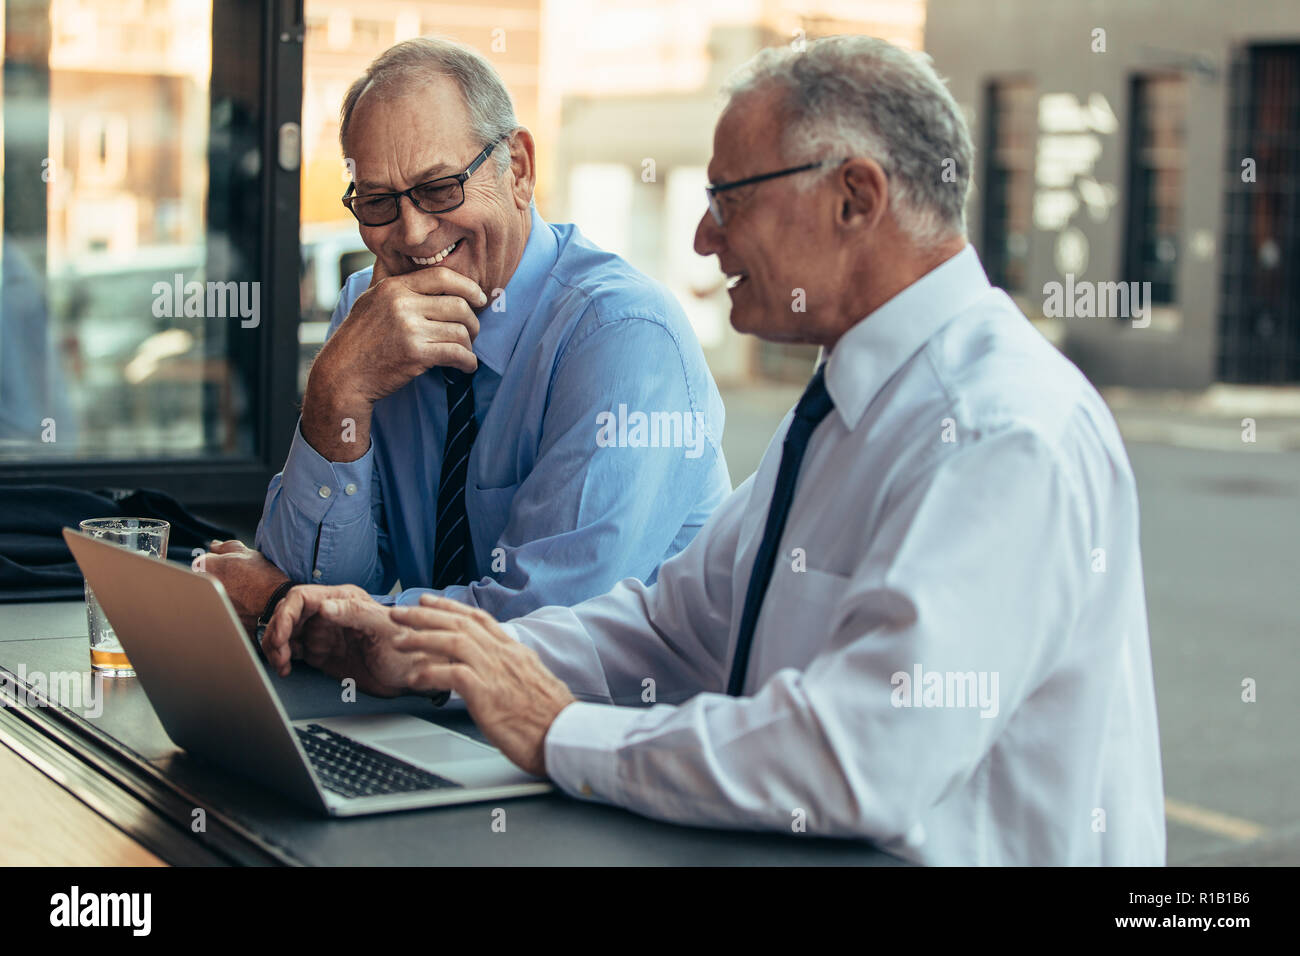 Senior businessmen at cafe with laptop discussing work and smiling. Senior business professionals having casual discussing over work at cafe after wor Stock Photo